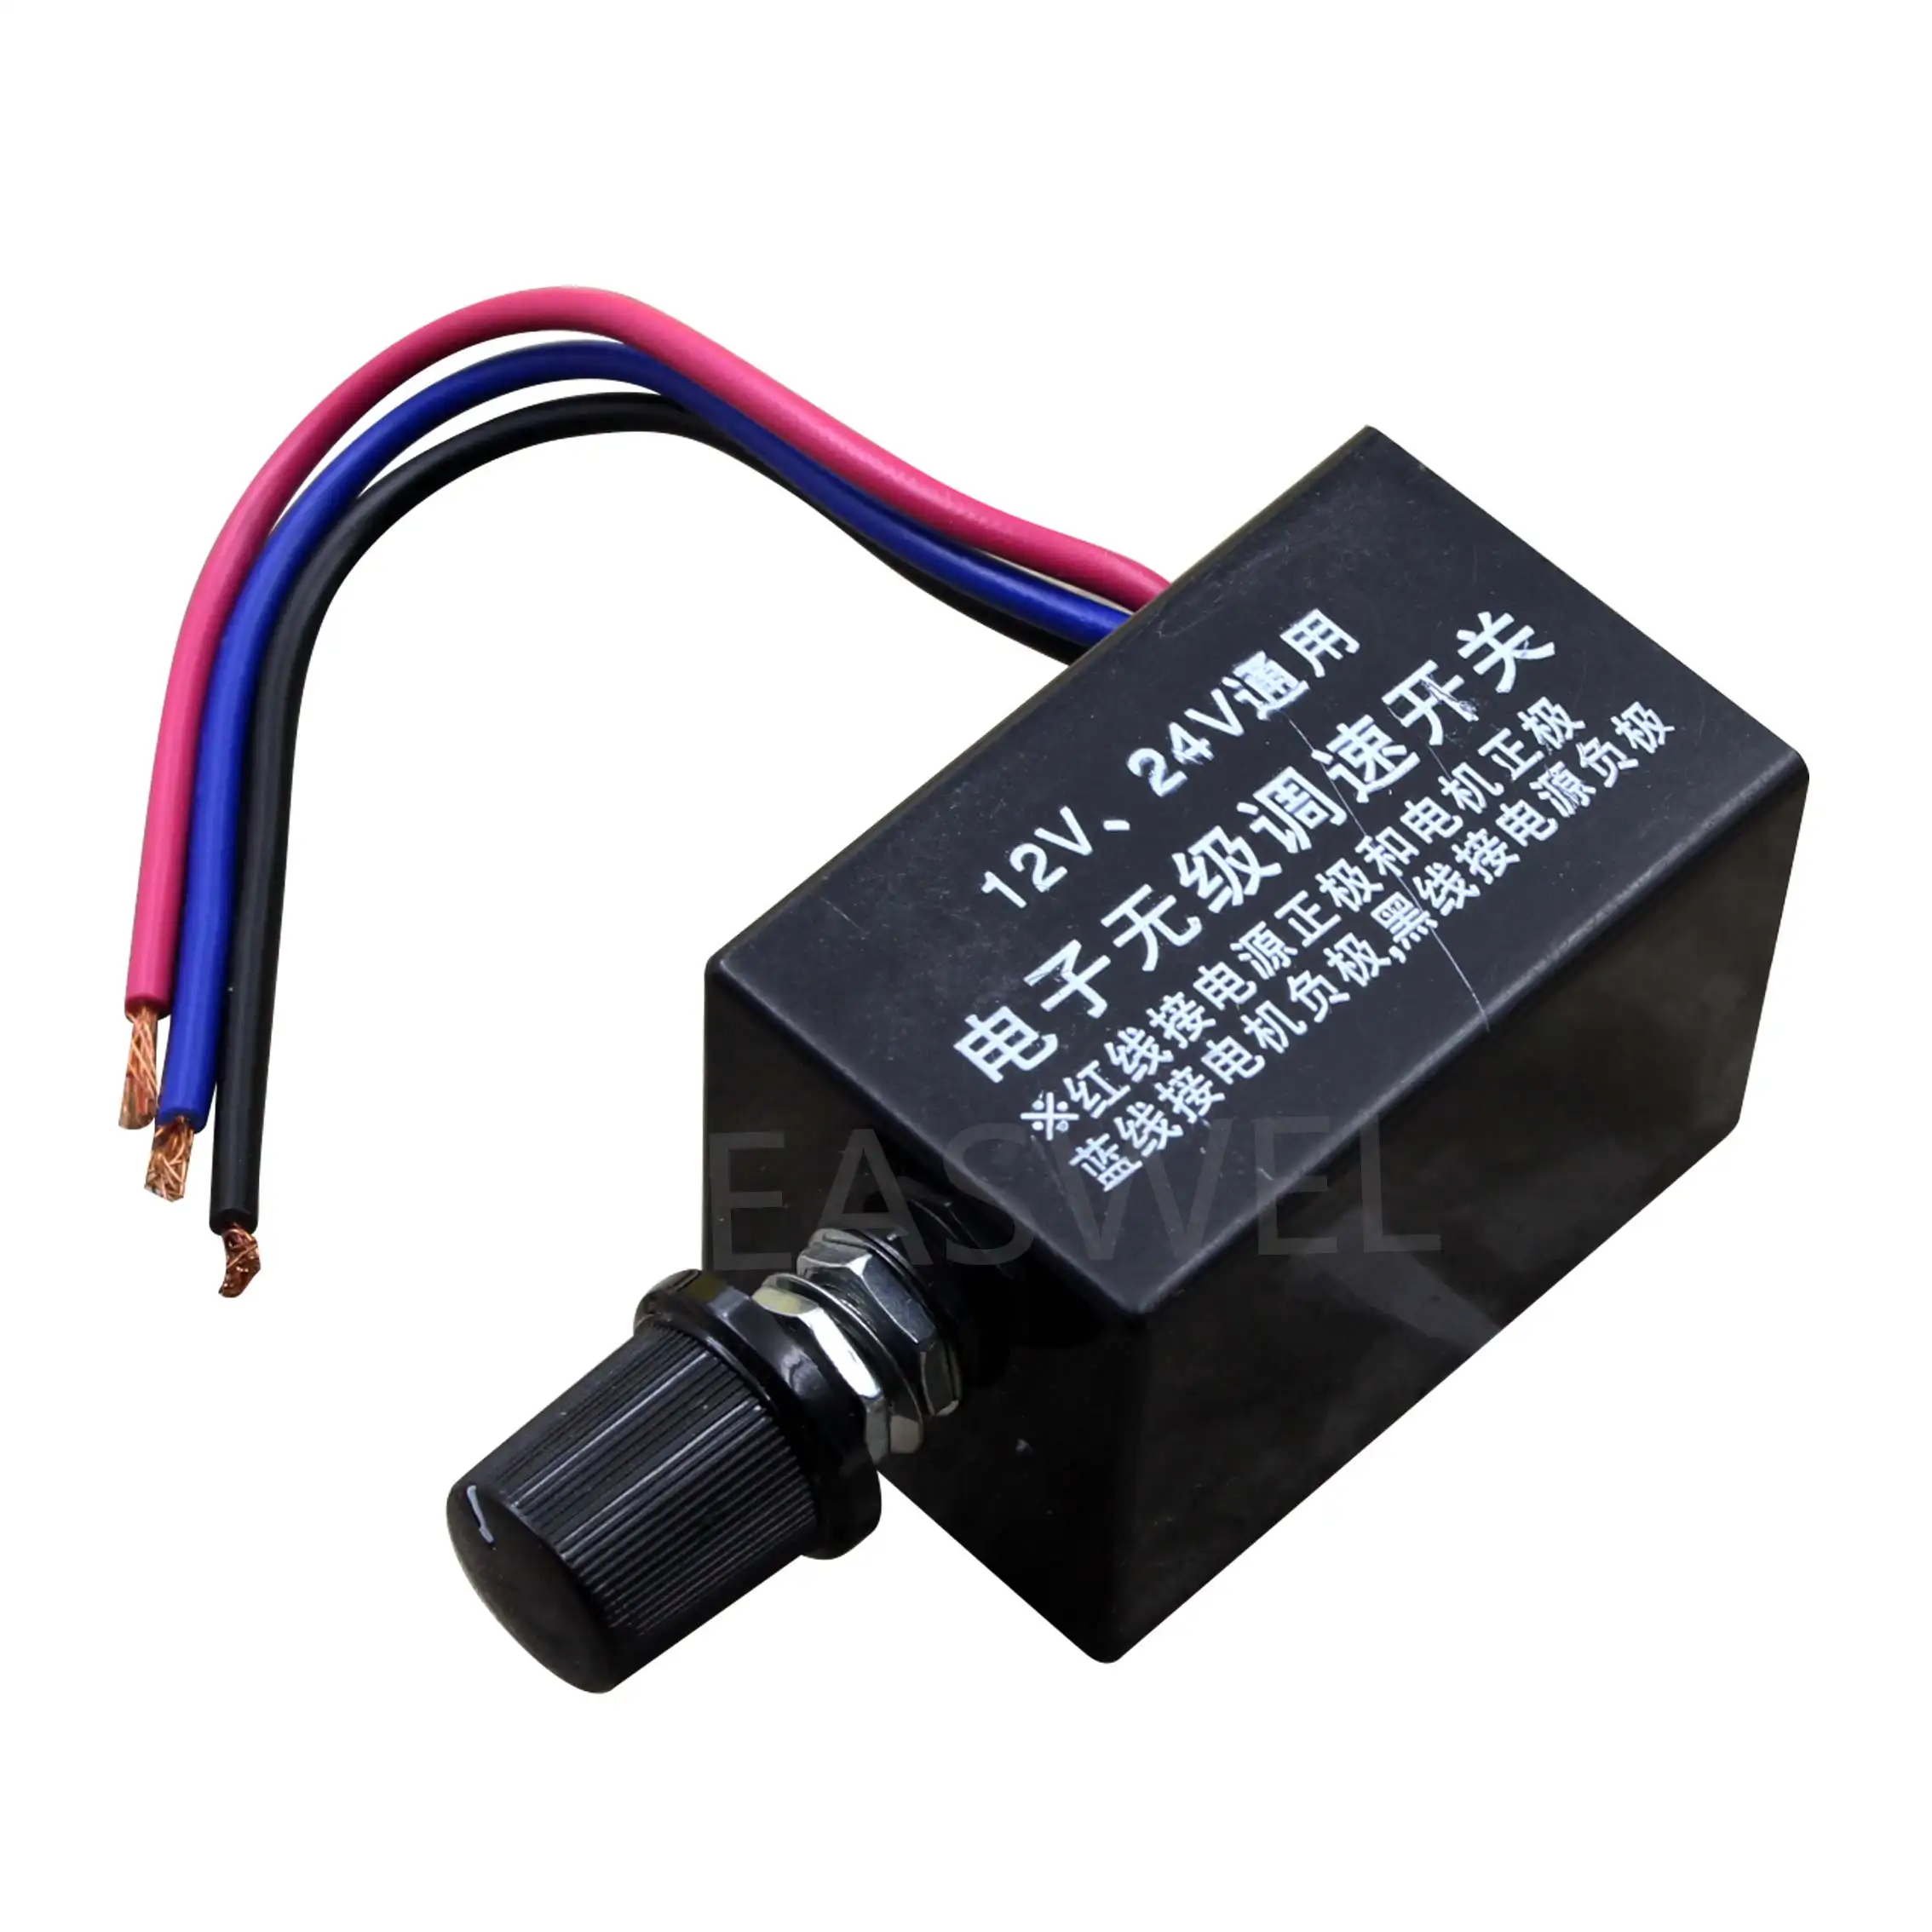 DC 12V 24V Motor Speed Controller Switch For Car Truck Fan Heater Control